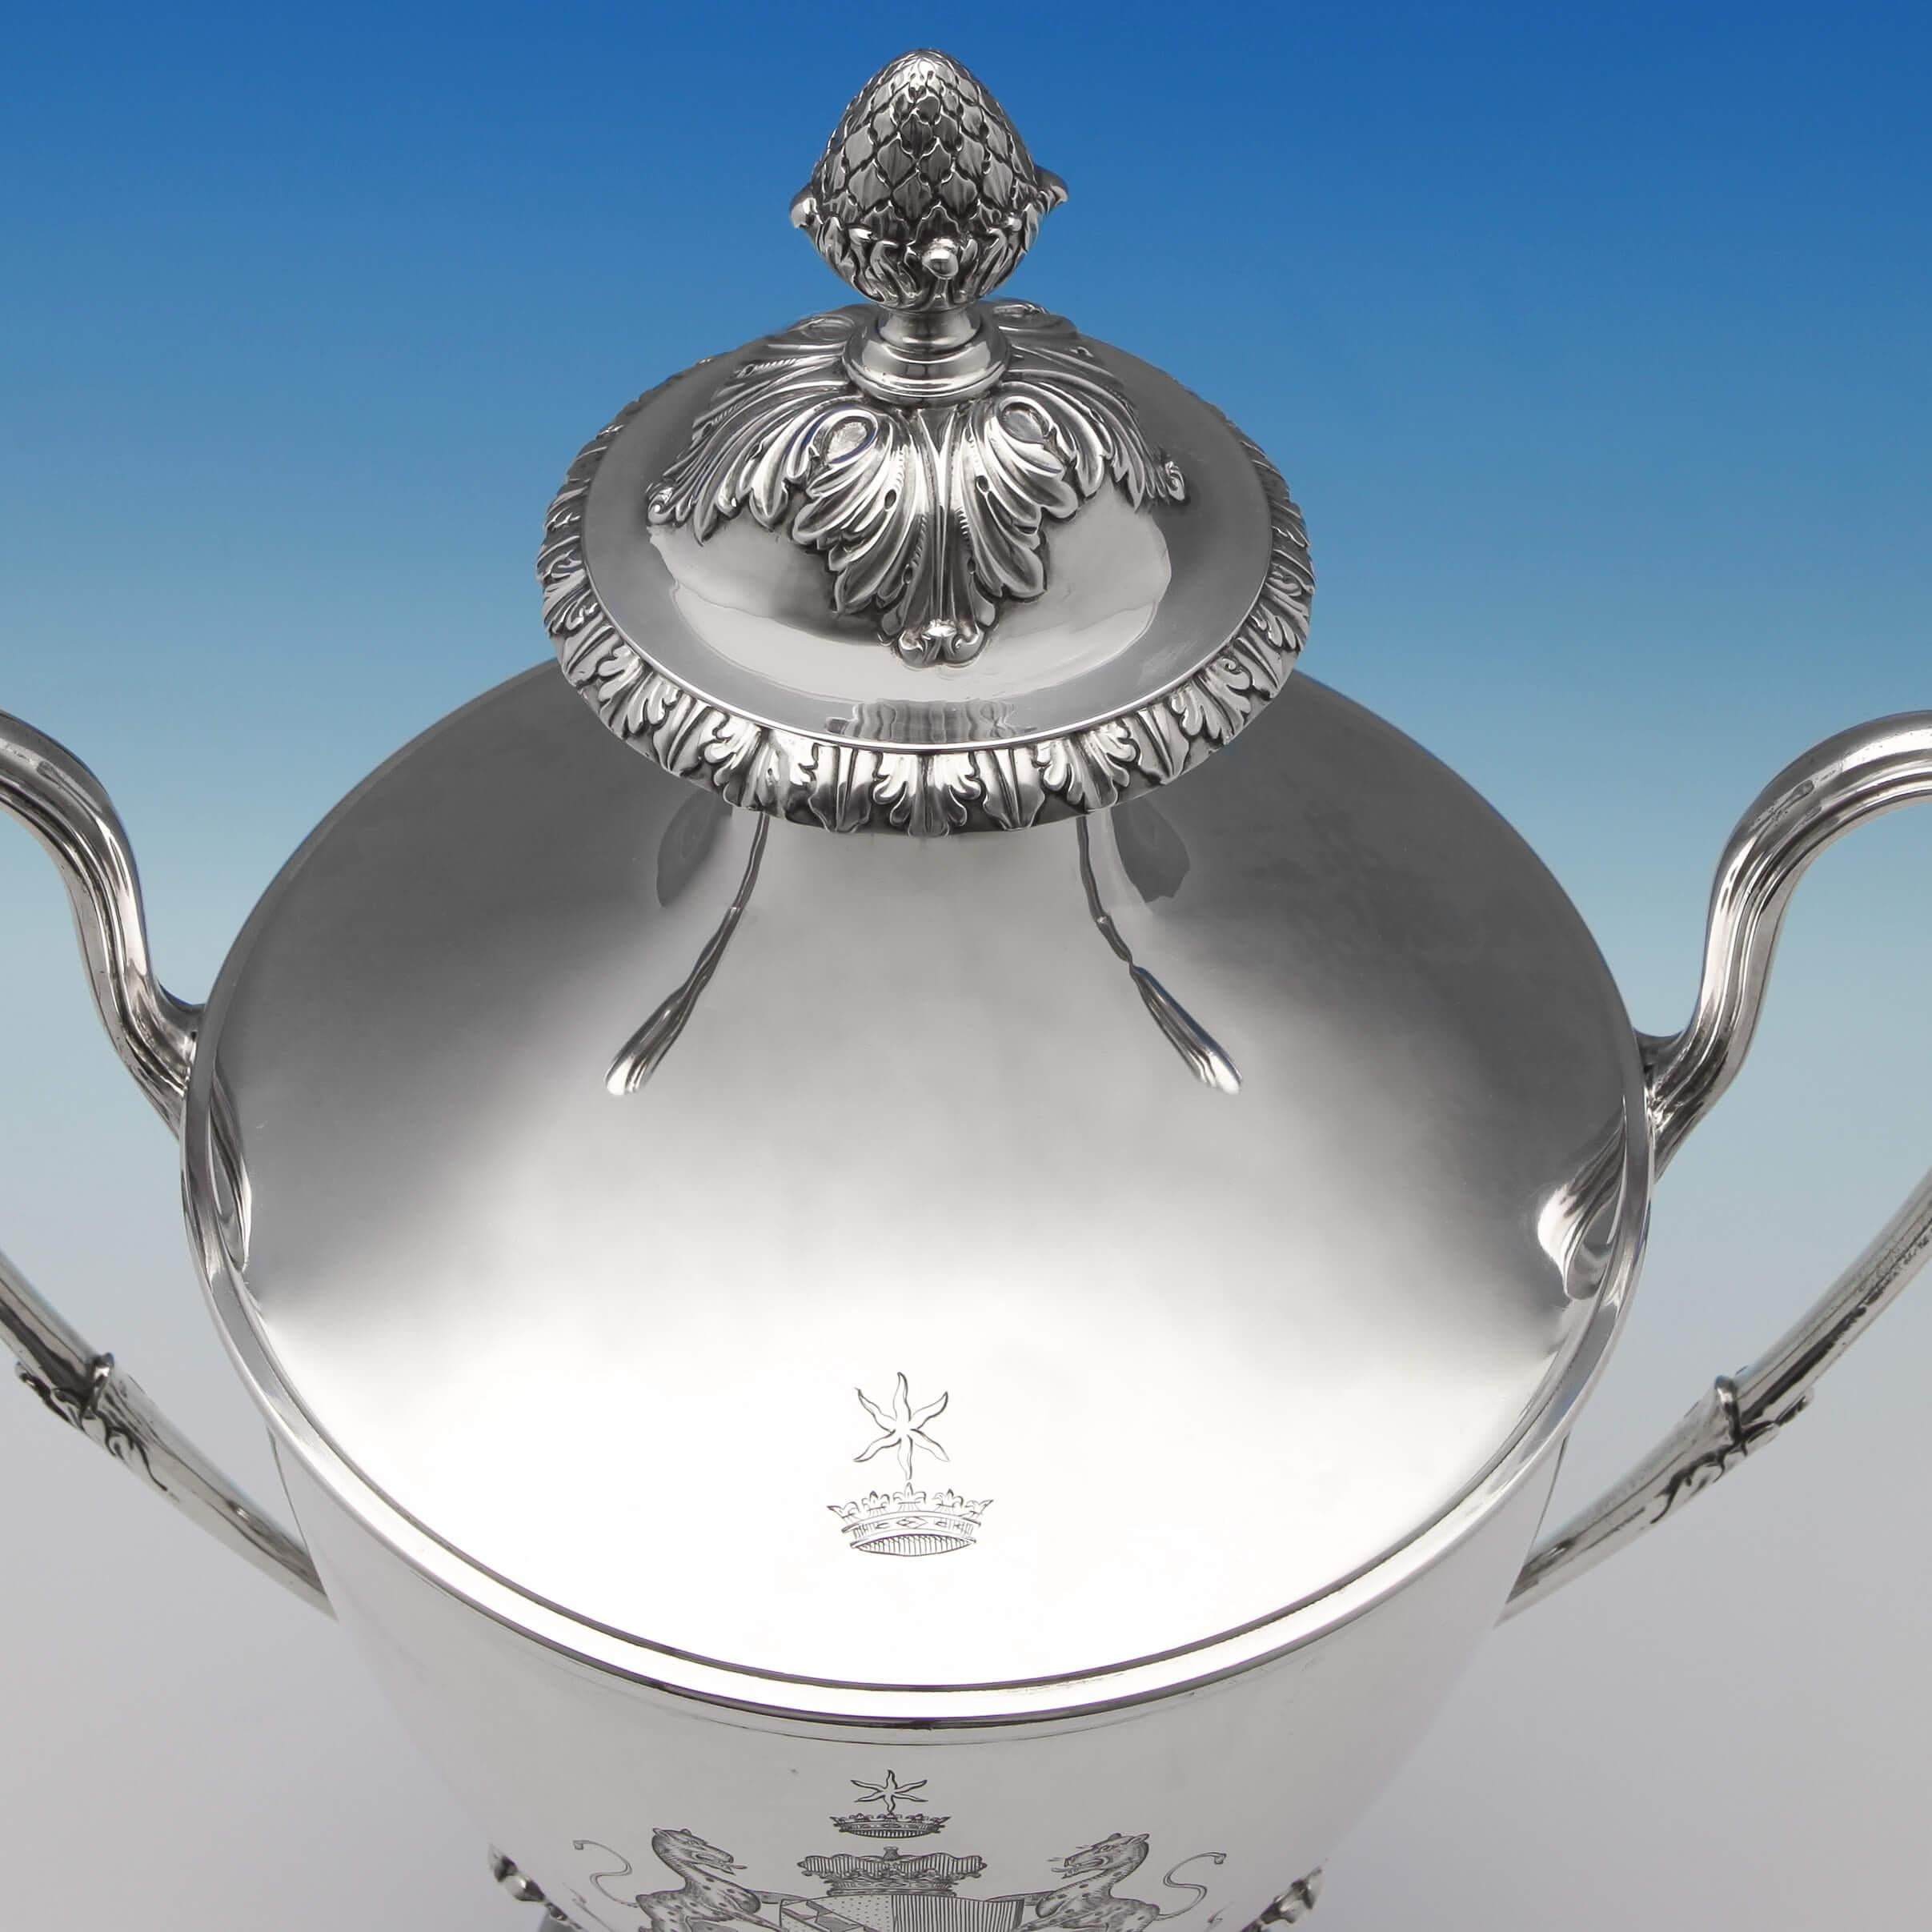 Hallmarked in London in 1773 by Charles Wright, this striking, antique George III, sterling silver cup and cover, features reed detailed loop handles and applied acanthus decoration. The cup bears an original engraved coat of arms for John Frederick